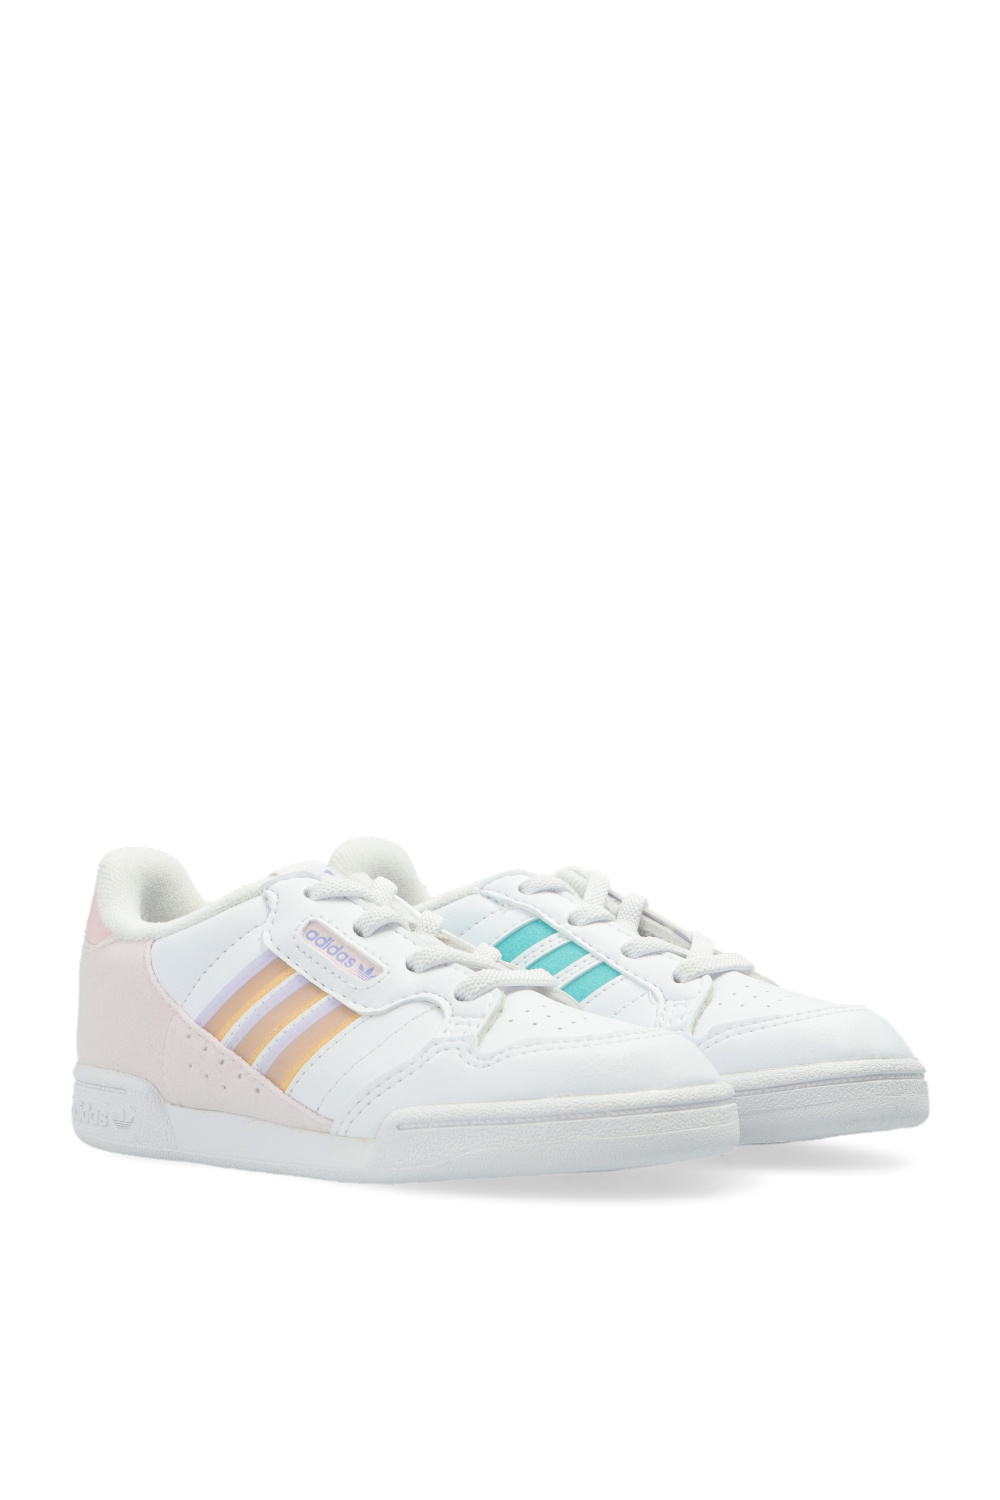 adidas suit Kids ‘Continental 80 Stripes’ sneakers